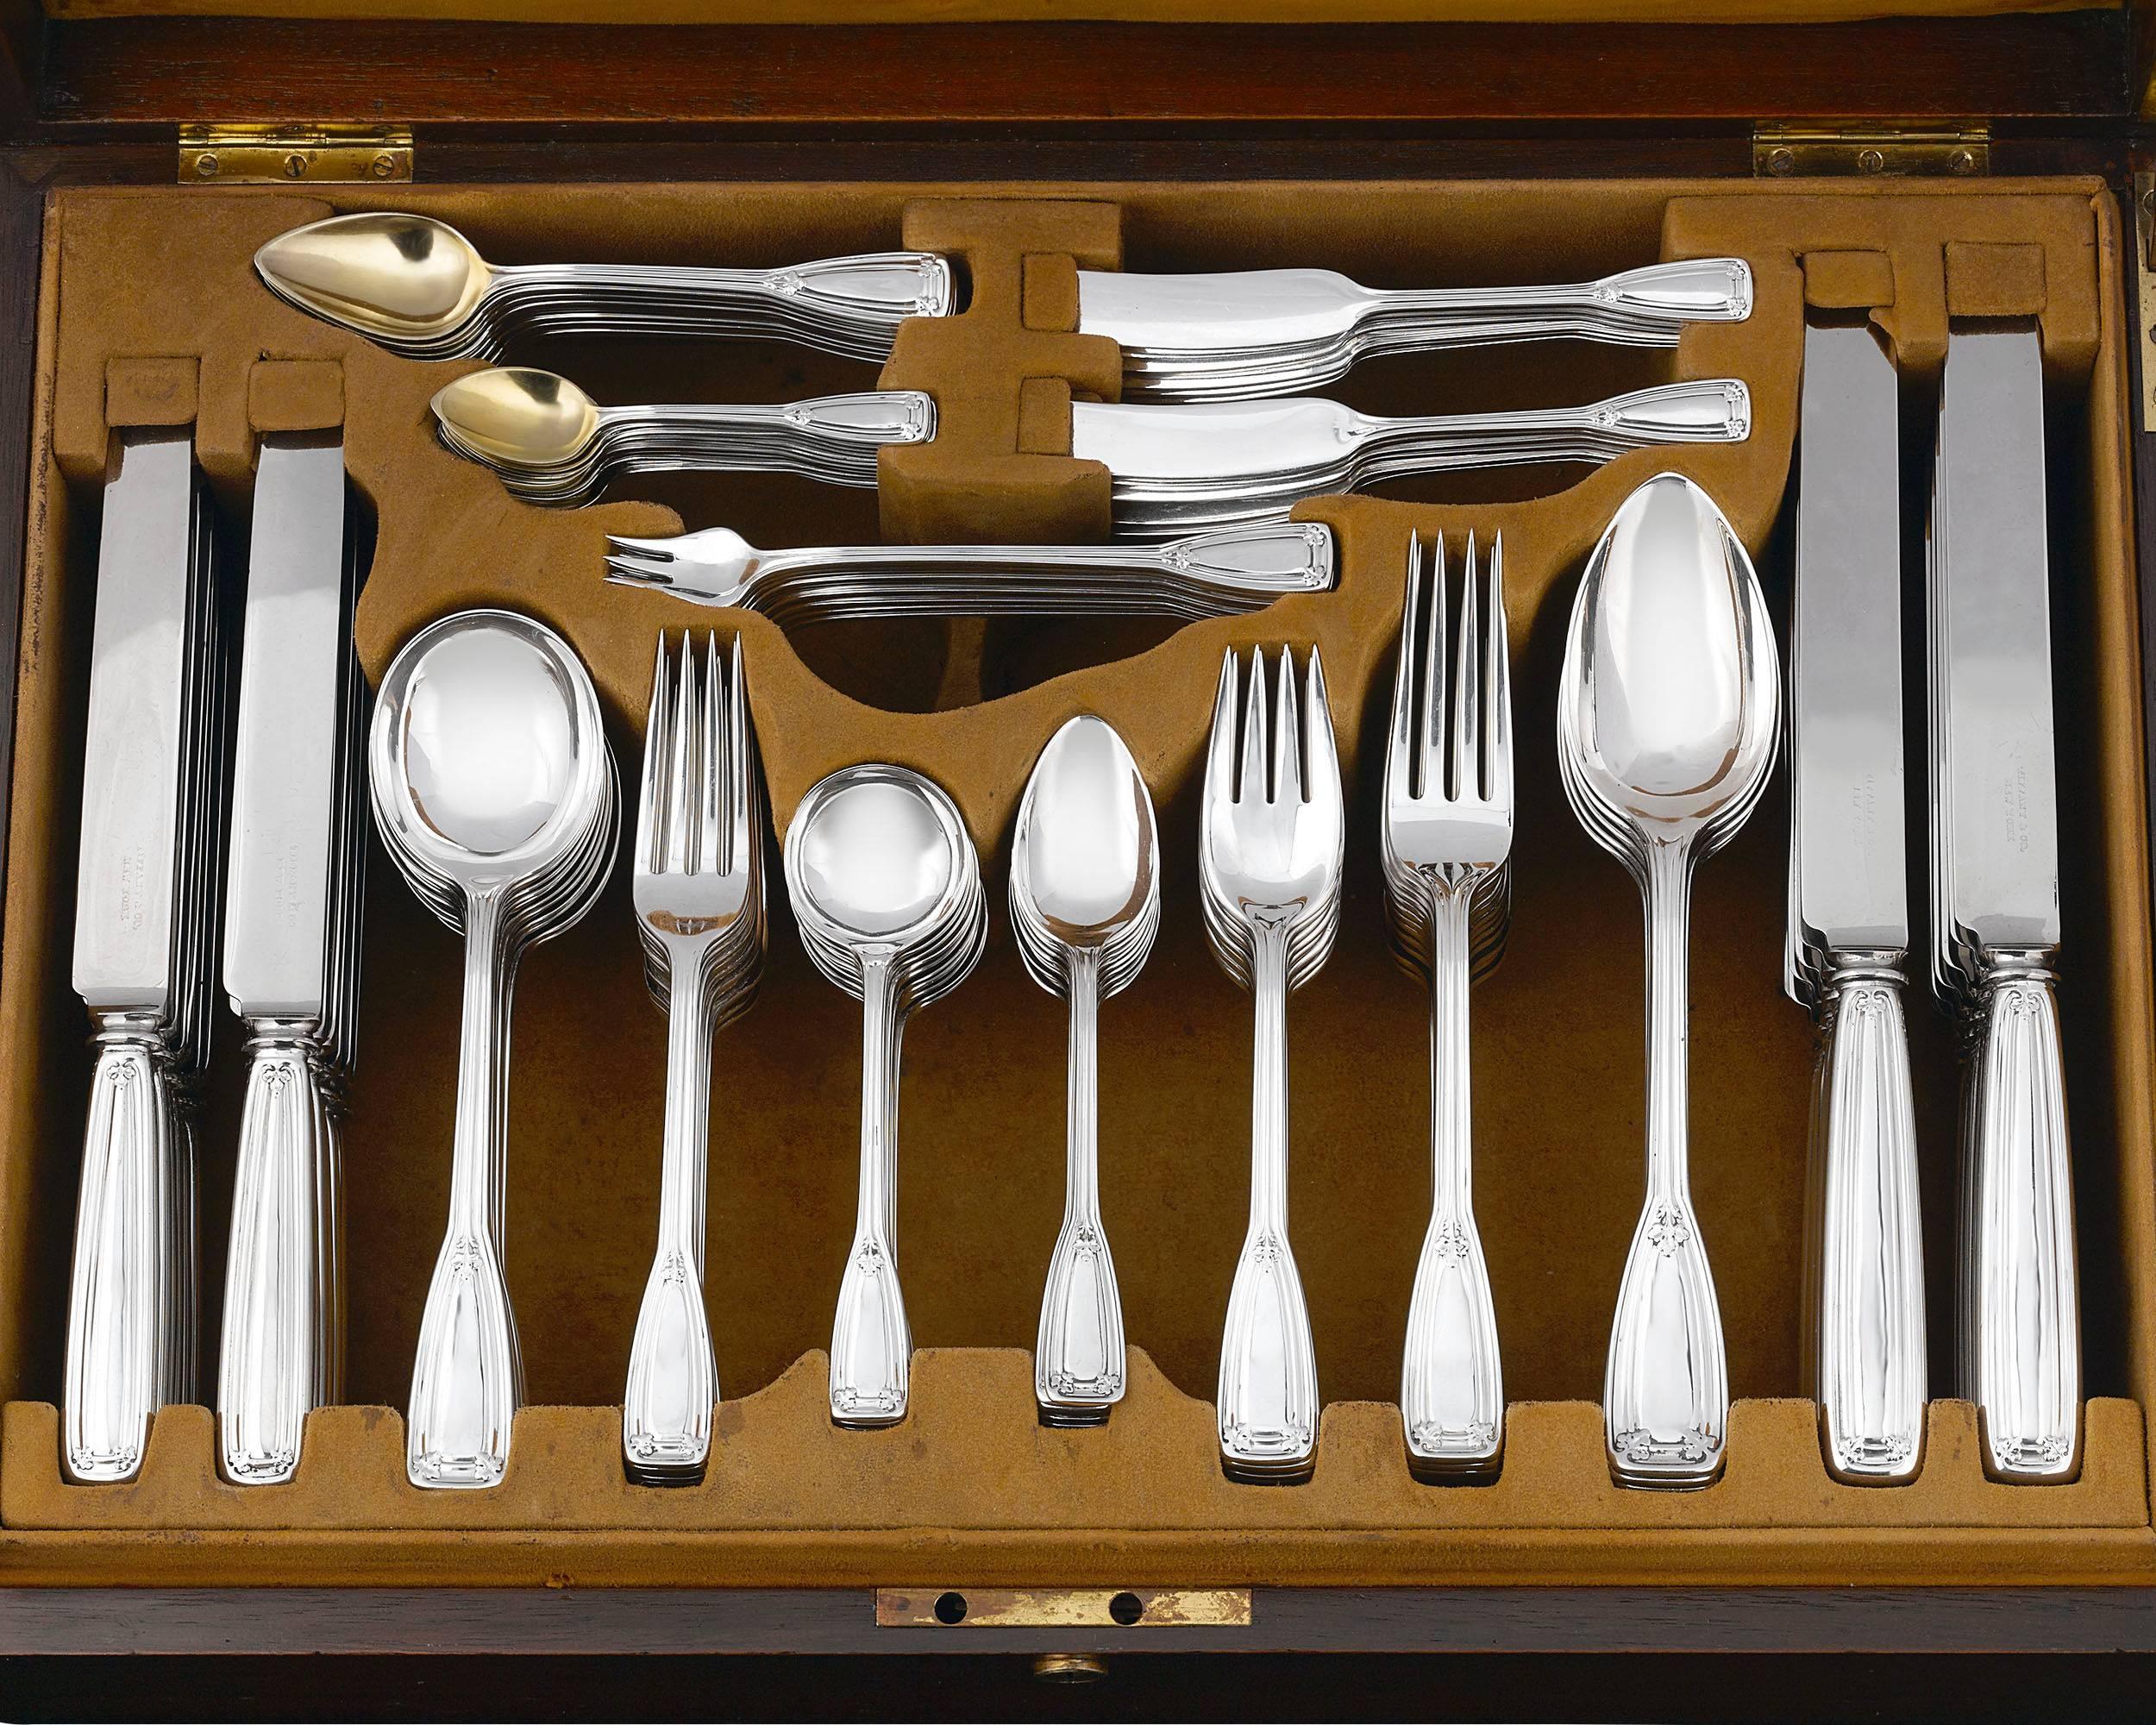 This exquisite 150-piece sterling silver flatware service for 12 was crafted by Tiffany & Co. in the timeless St. Dunstan pattern. The classic Art Deco design is named for St. Dunstan, the patron saint of gold and silversmiths. It exhibits a